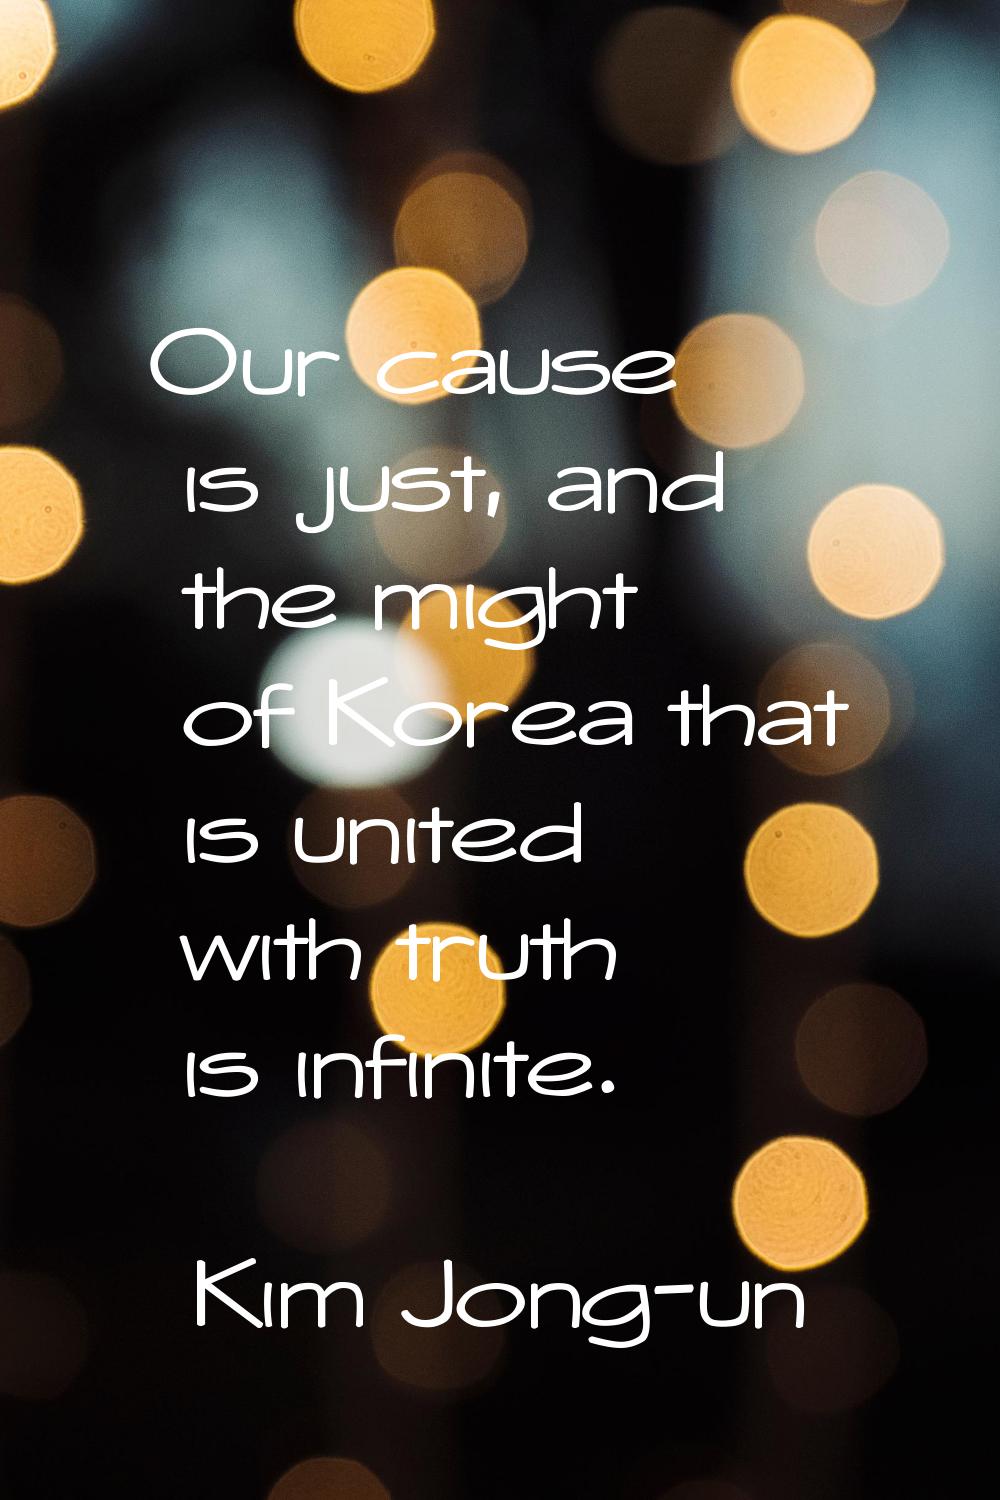 Our cause is just, and the might of Korea that is united with truth is infinite.